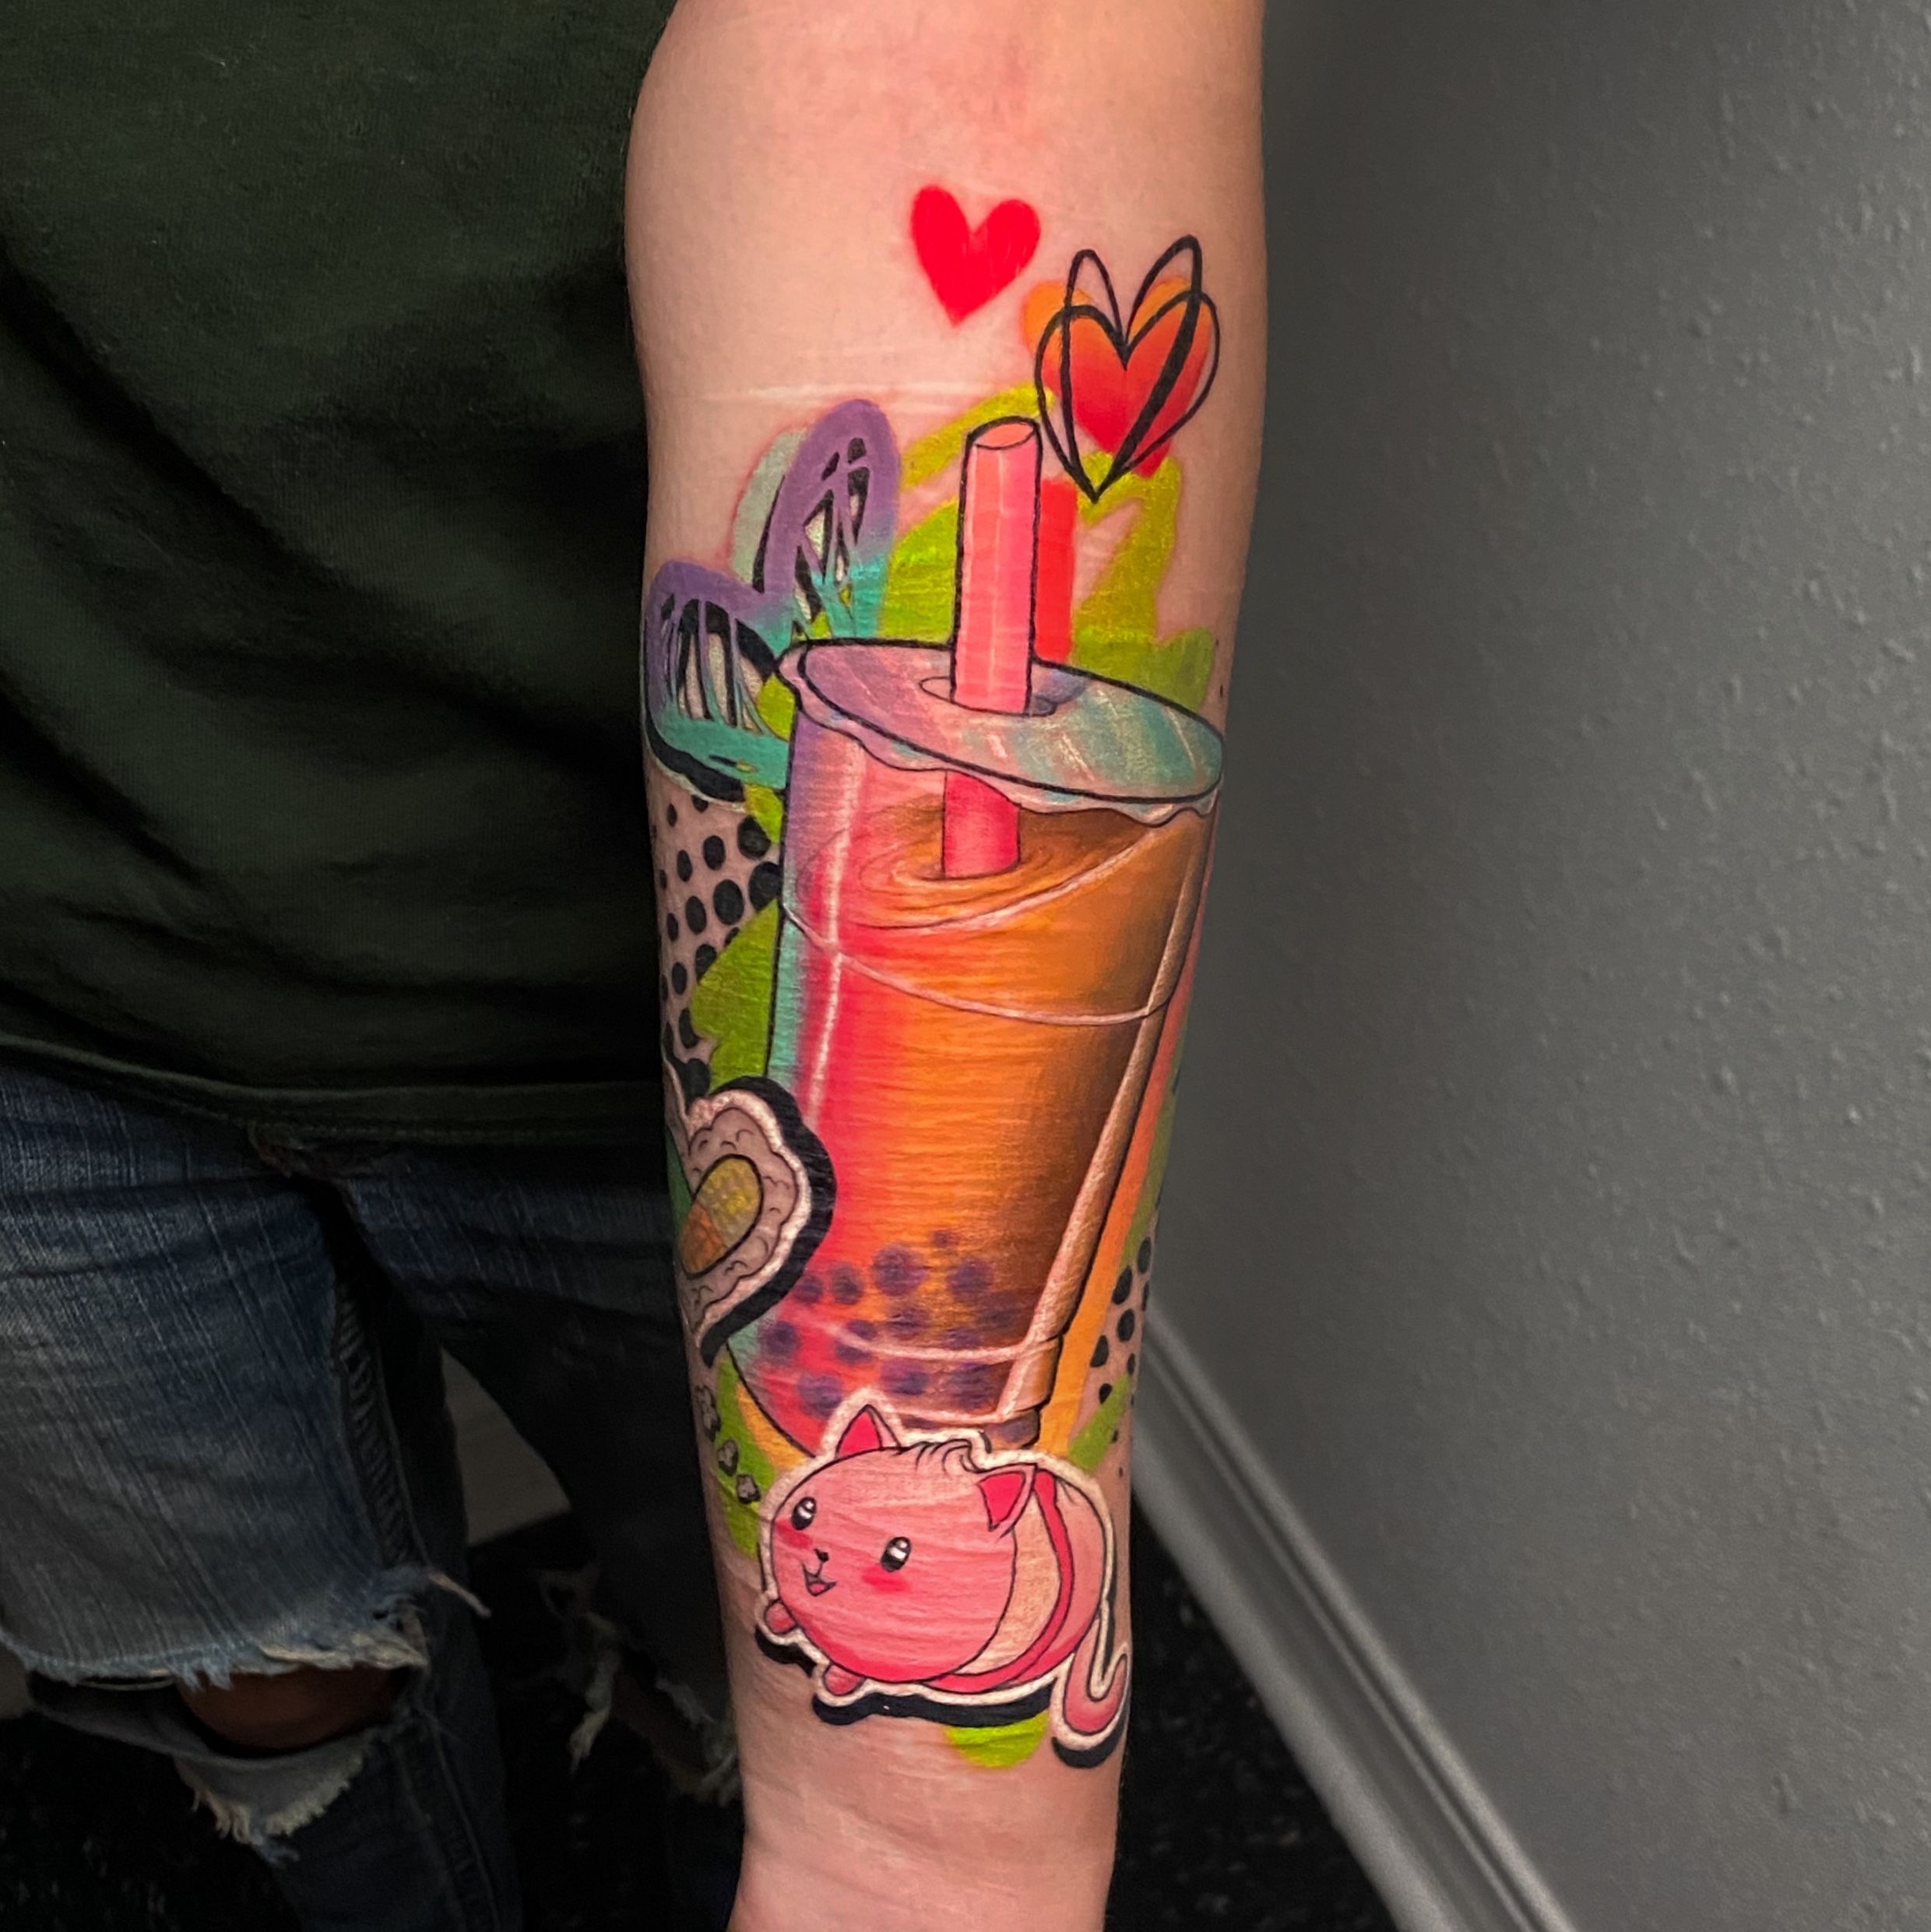 Do you love Boba enough to get a tattoo   banhmiandti   sopheating   Show your boba love with bobalove     Tattoos Get a tattoo  Minimalist tattoo